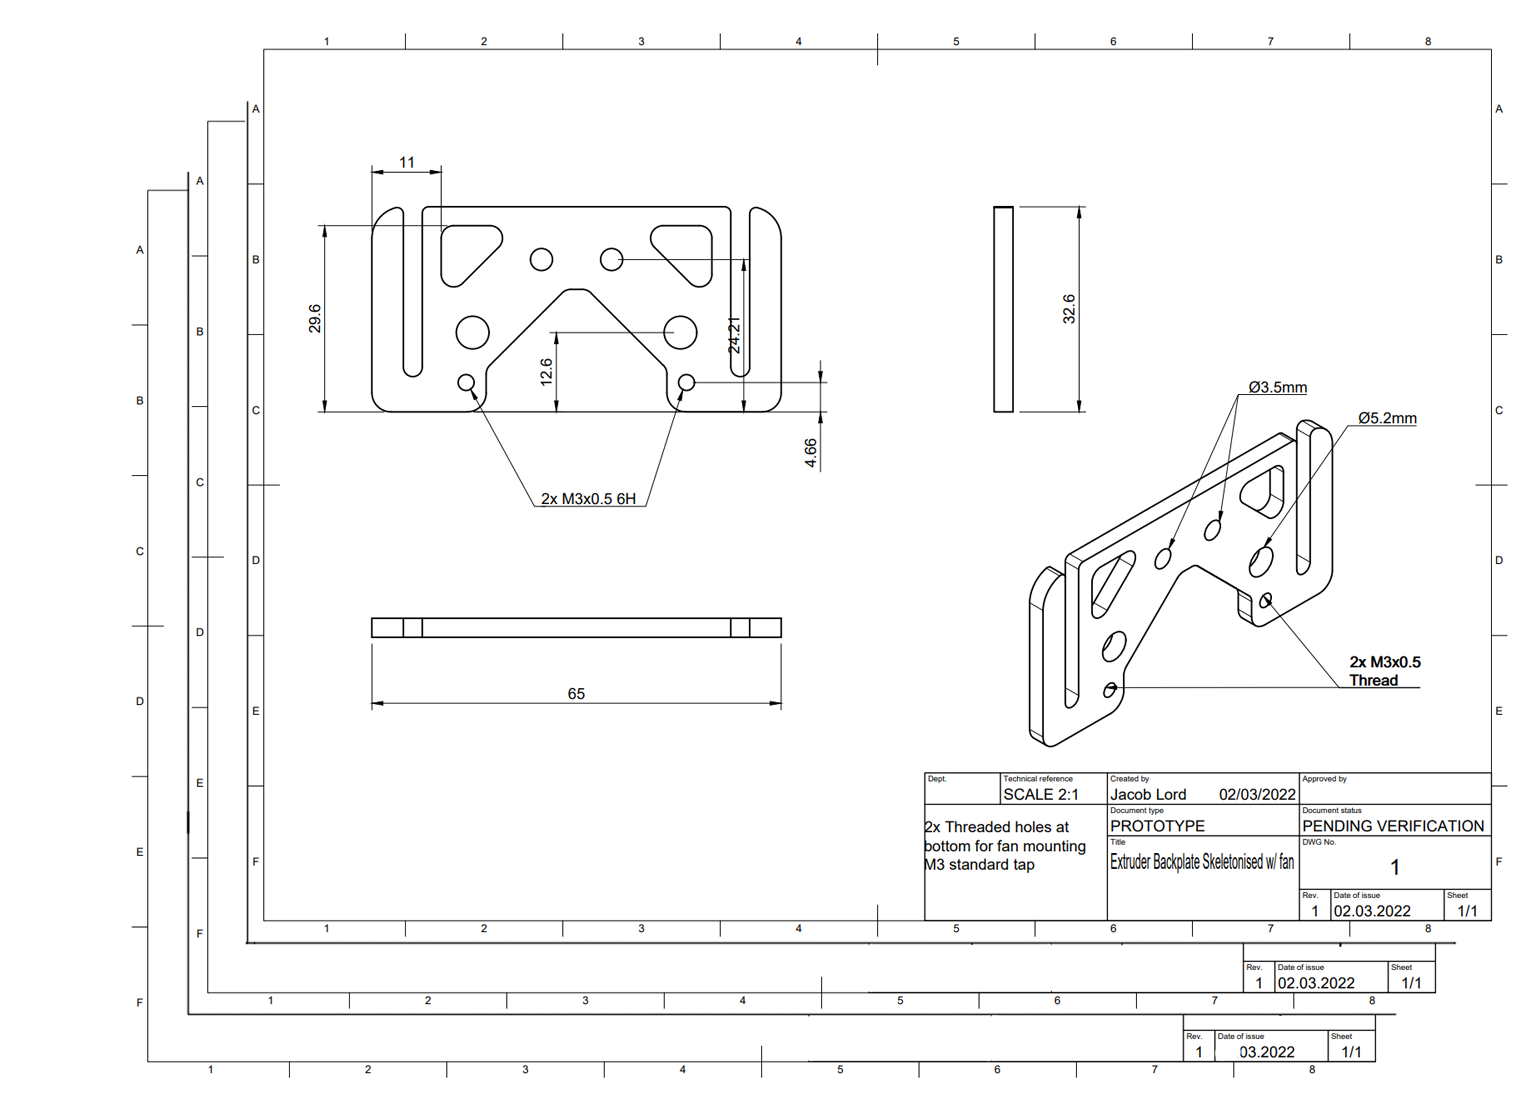 Depicted are several engineering cad drawings with our components and all subsequent dimensions present